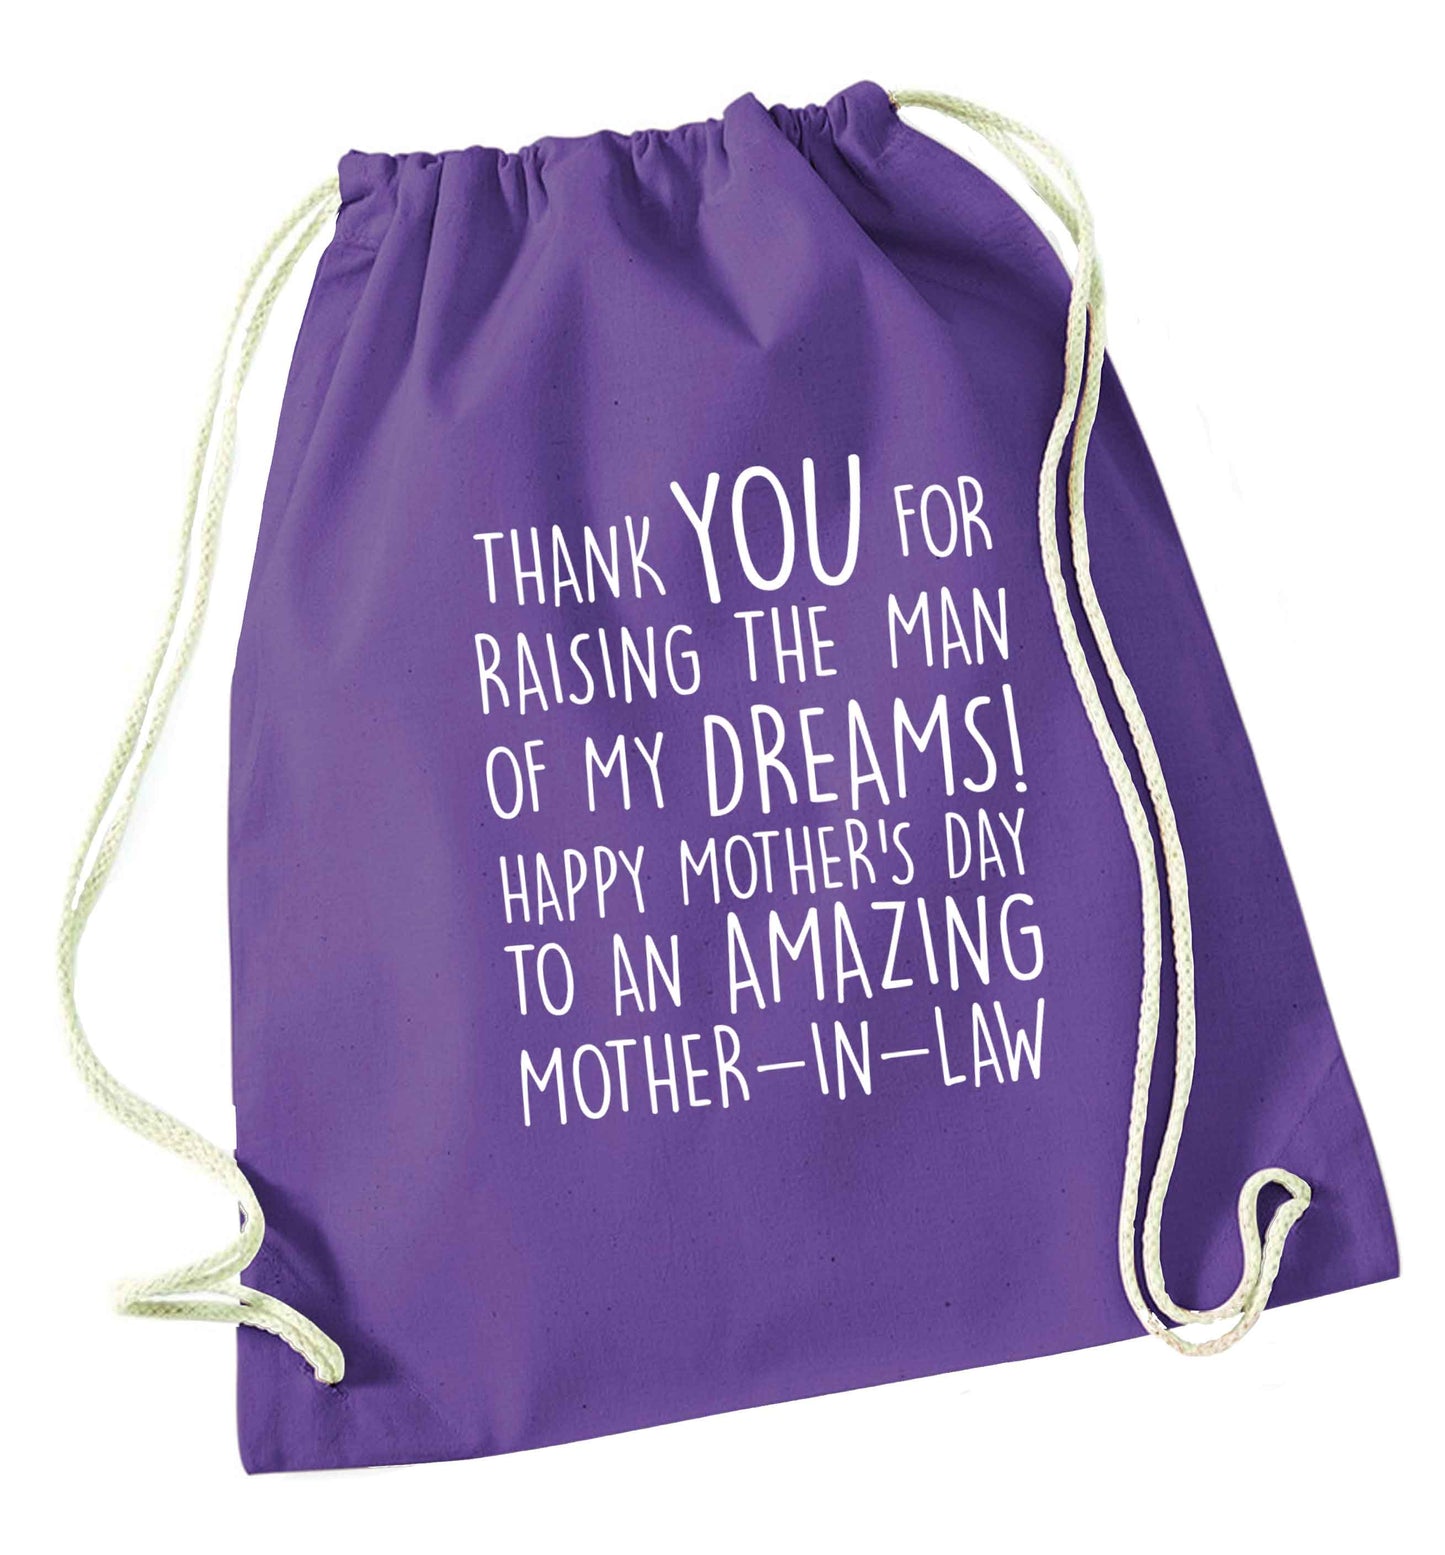 Raising the man of my dreams mother's day mother-in-law purple drawstring bag